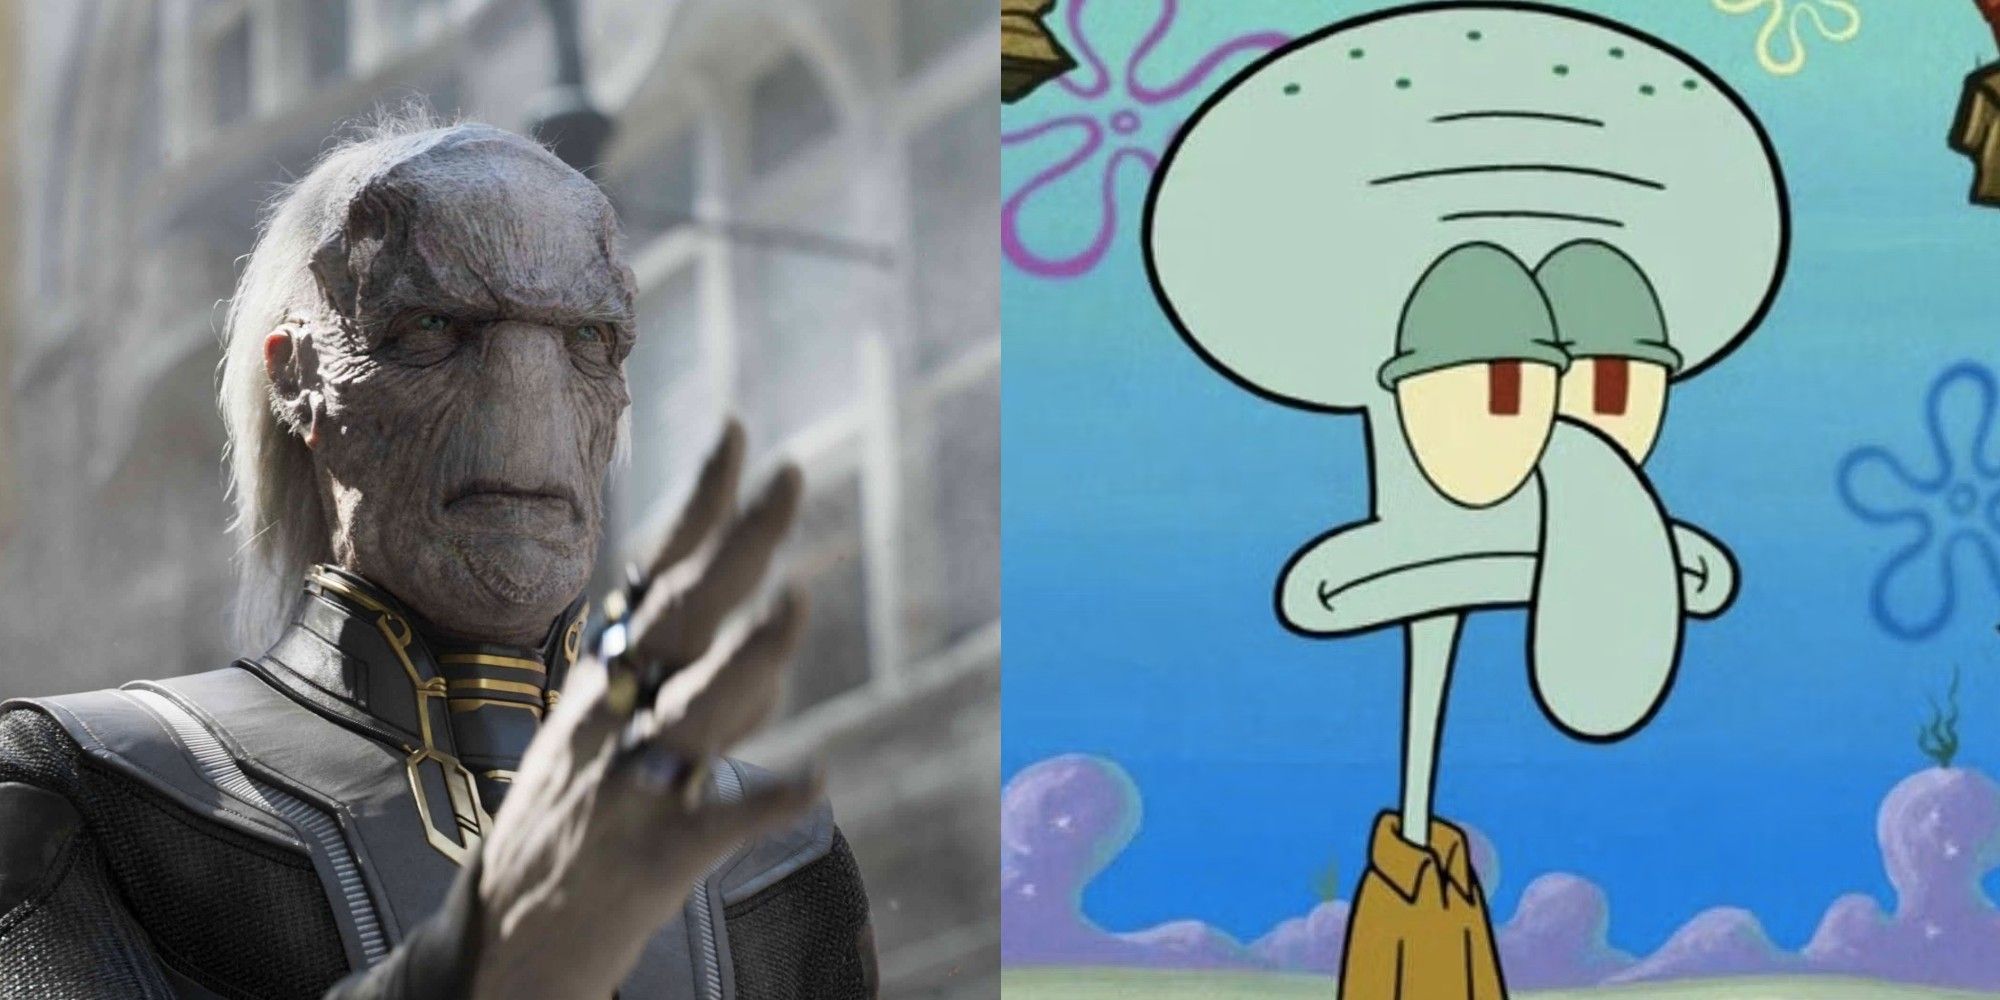 Left to right: Ebony Maw in Avengers: Infinity War and Squidward in Spongebob